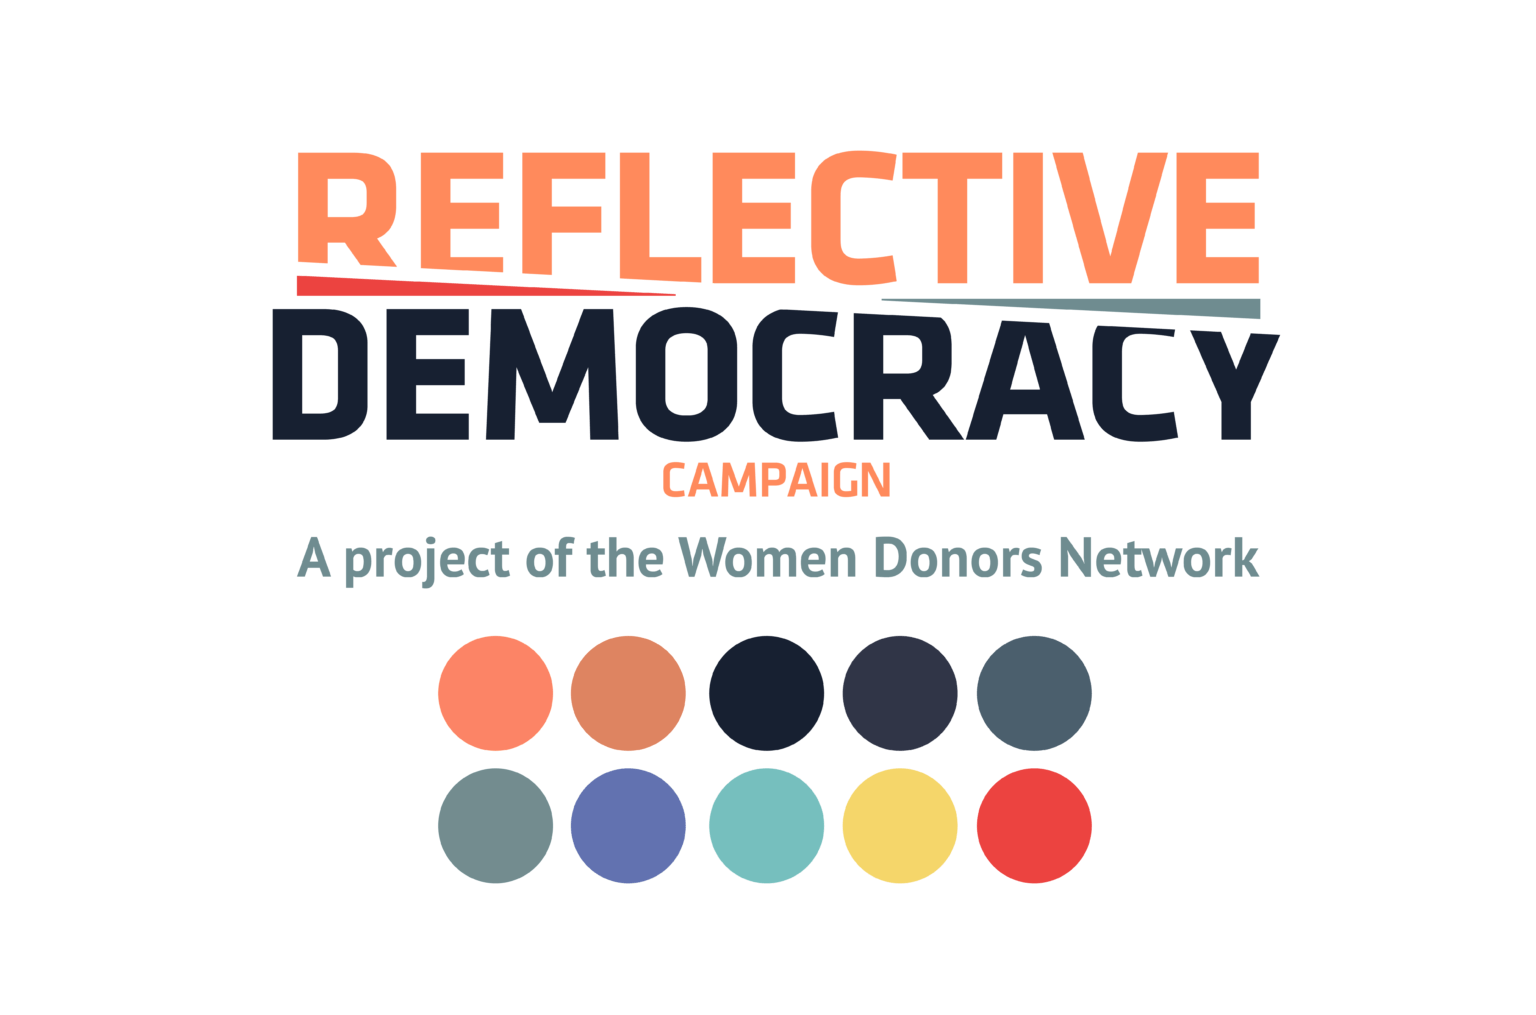 The Reflective Democracy Campaign logo and palette before our work